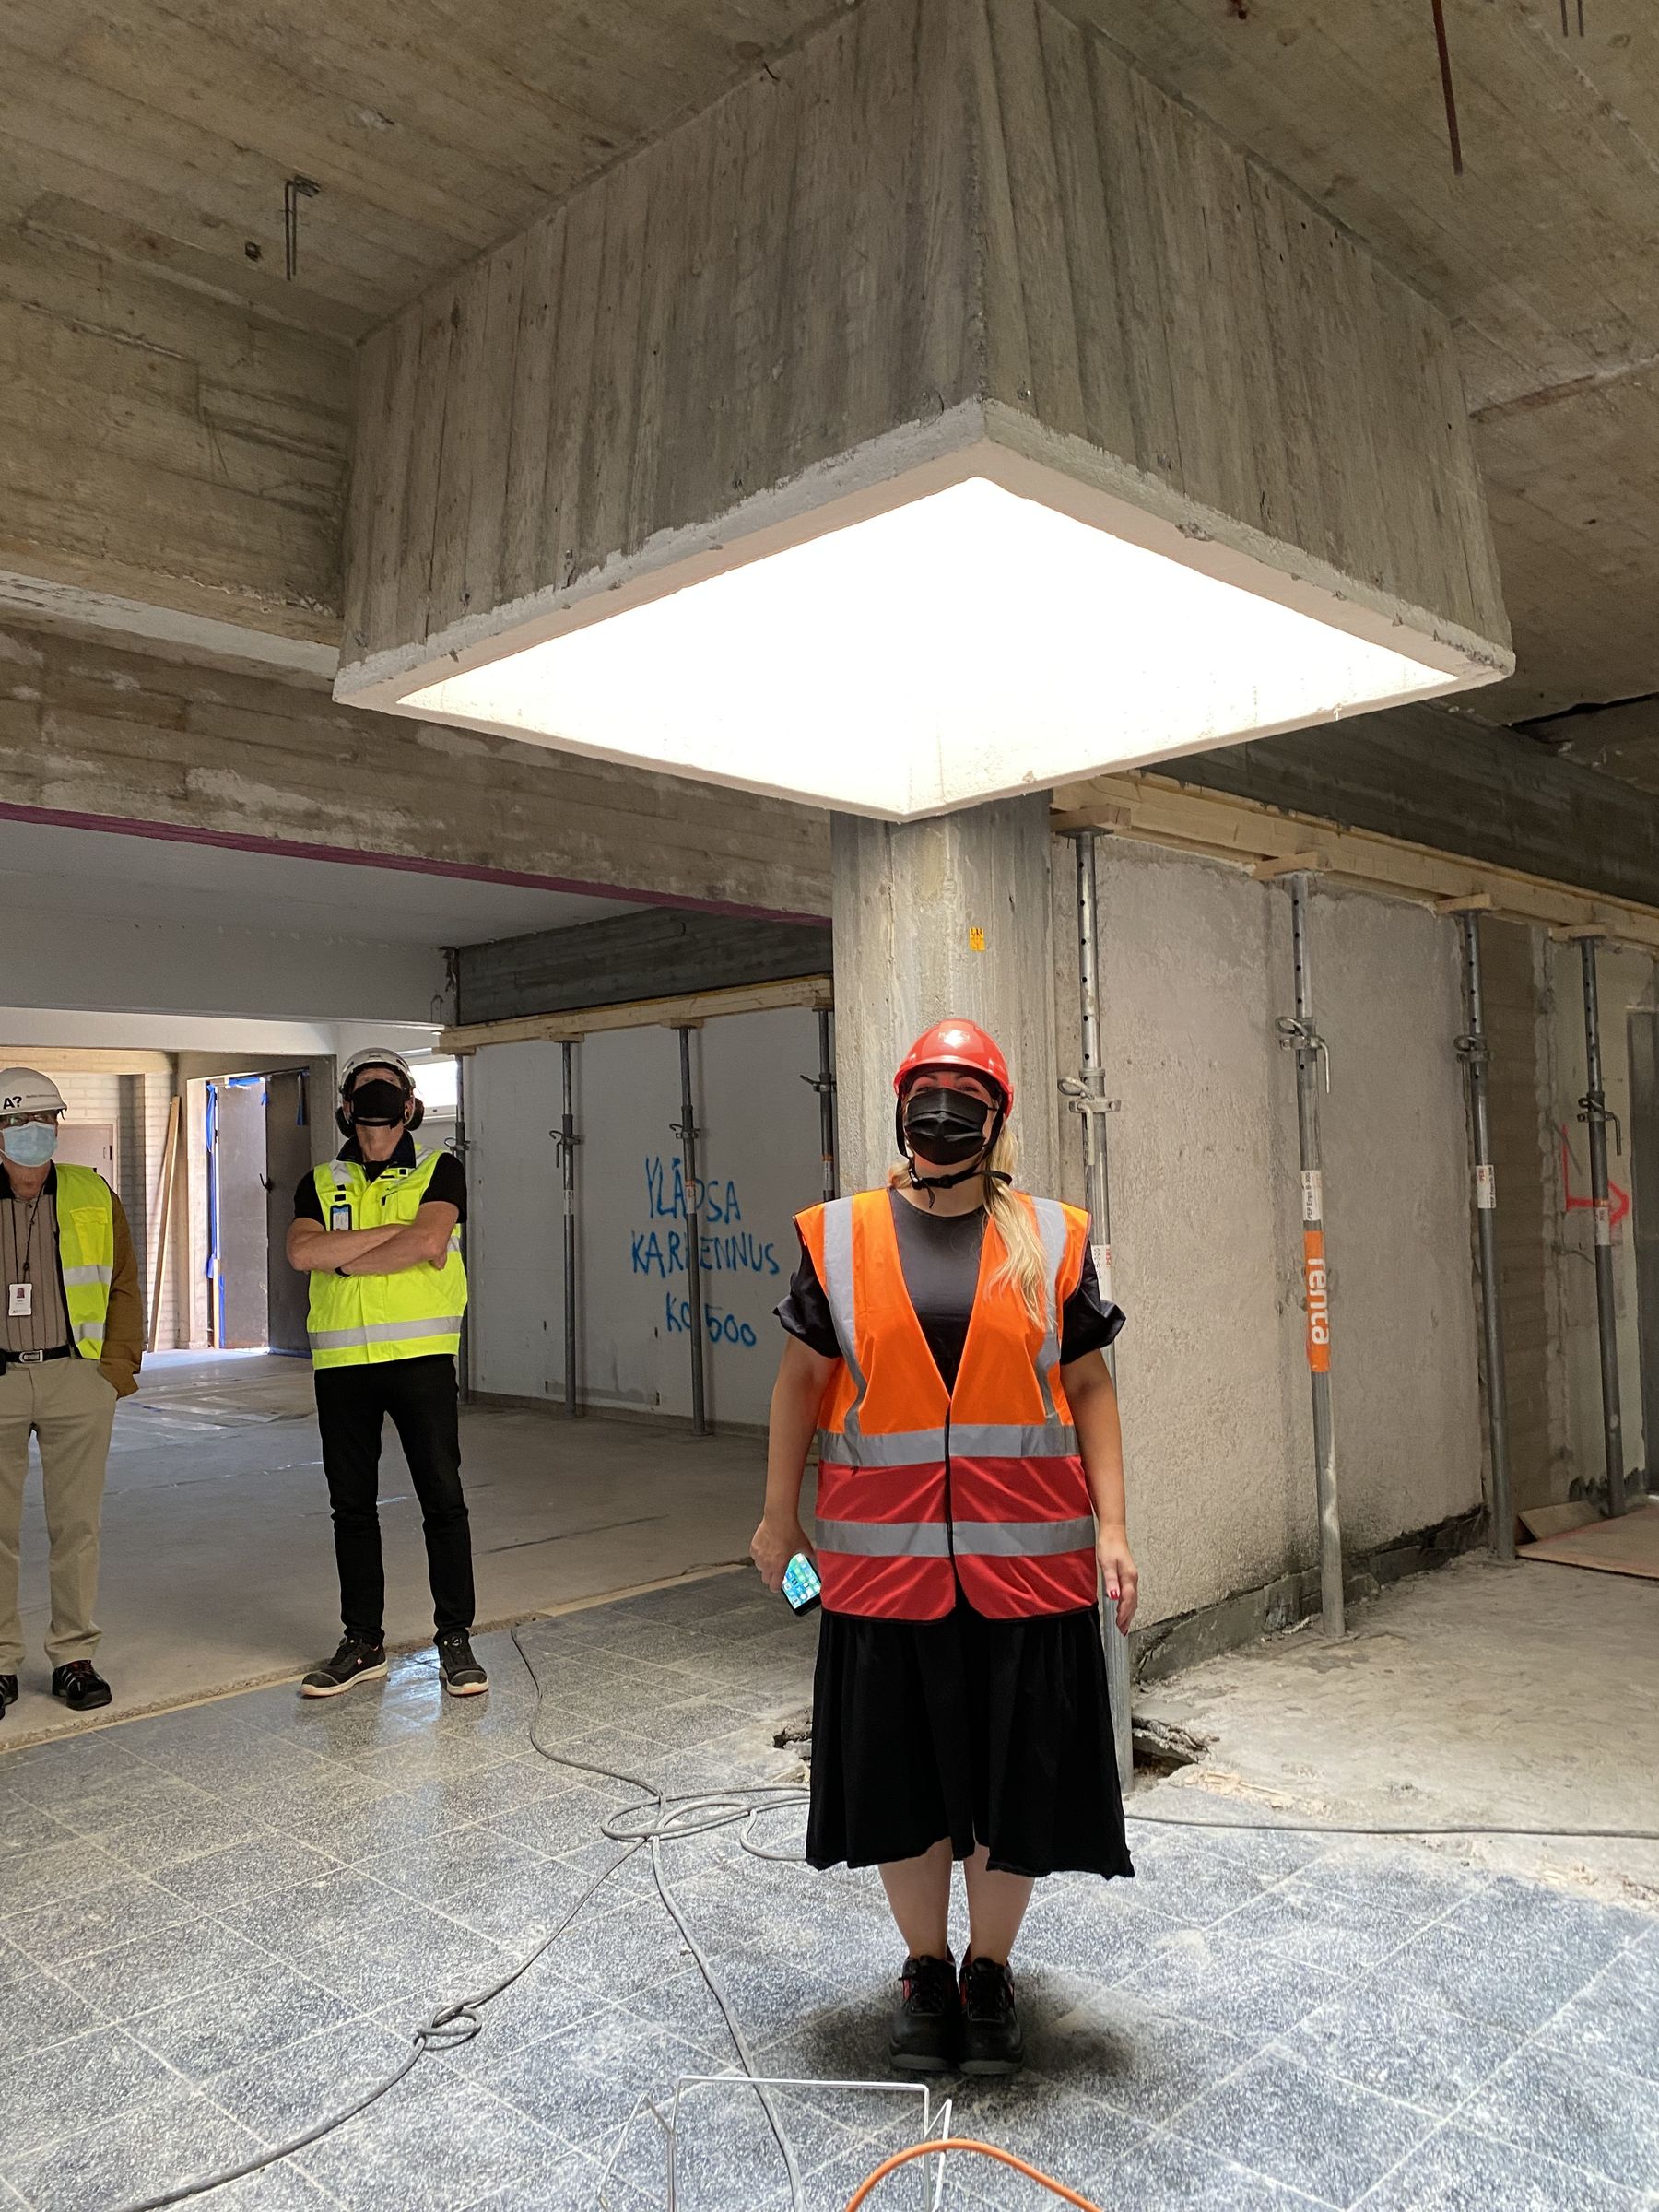 Two people look towards the third person standing in the middle of the picture, facing the camera. She wears a black dress and is under a skylight inside a building under construction